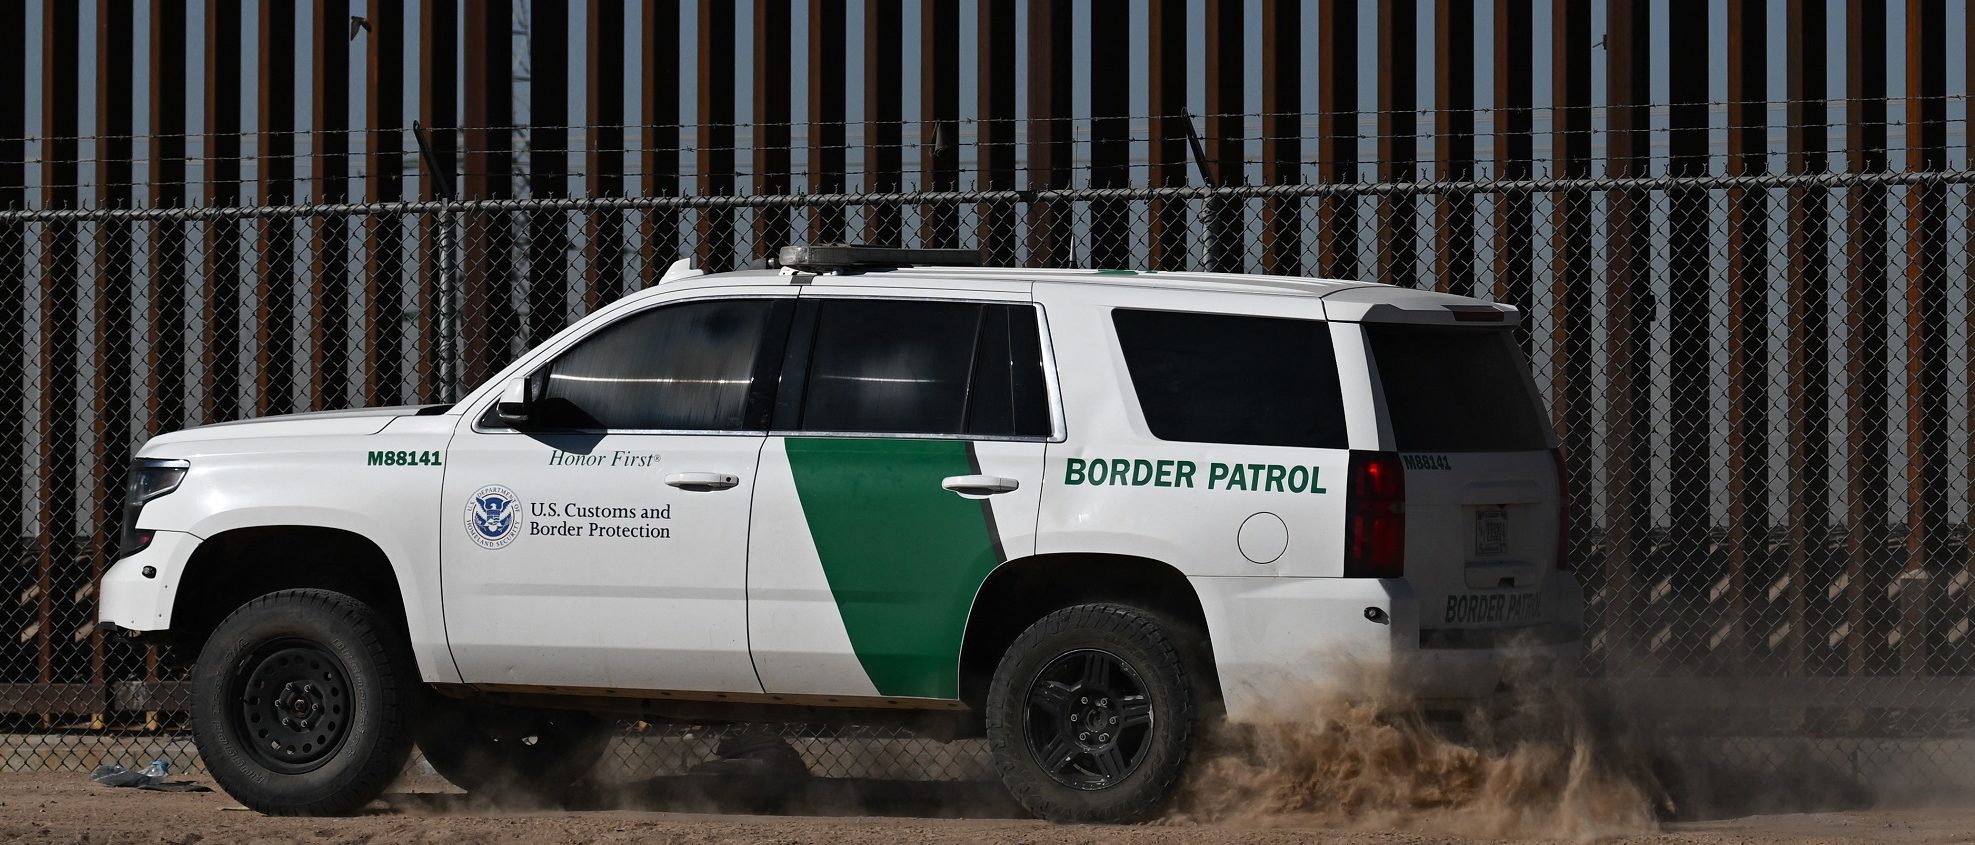 A US Customs and Border Protection Border Patrol vehicle is driven along the US-Mexico border wall in El Paso, Texas on May 10, 2023. (Photo by PATRICK T. FALLON/AFP via Getty Images)